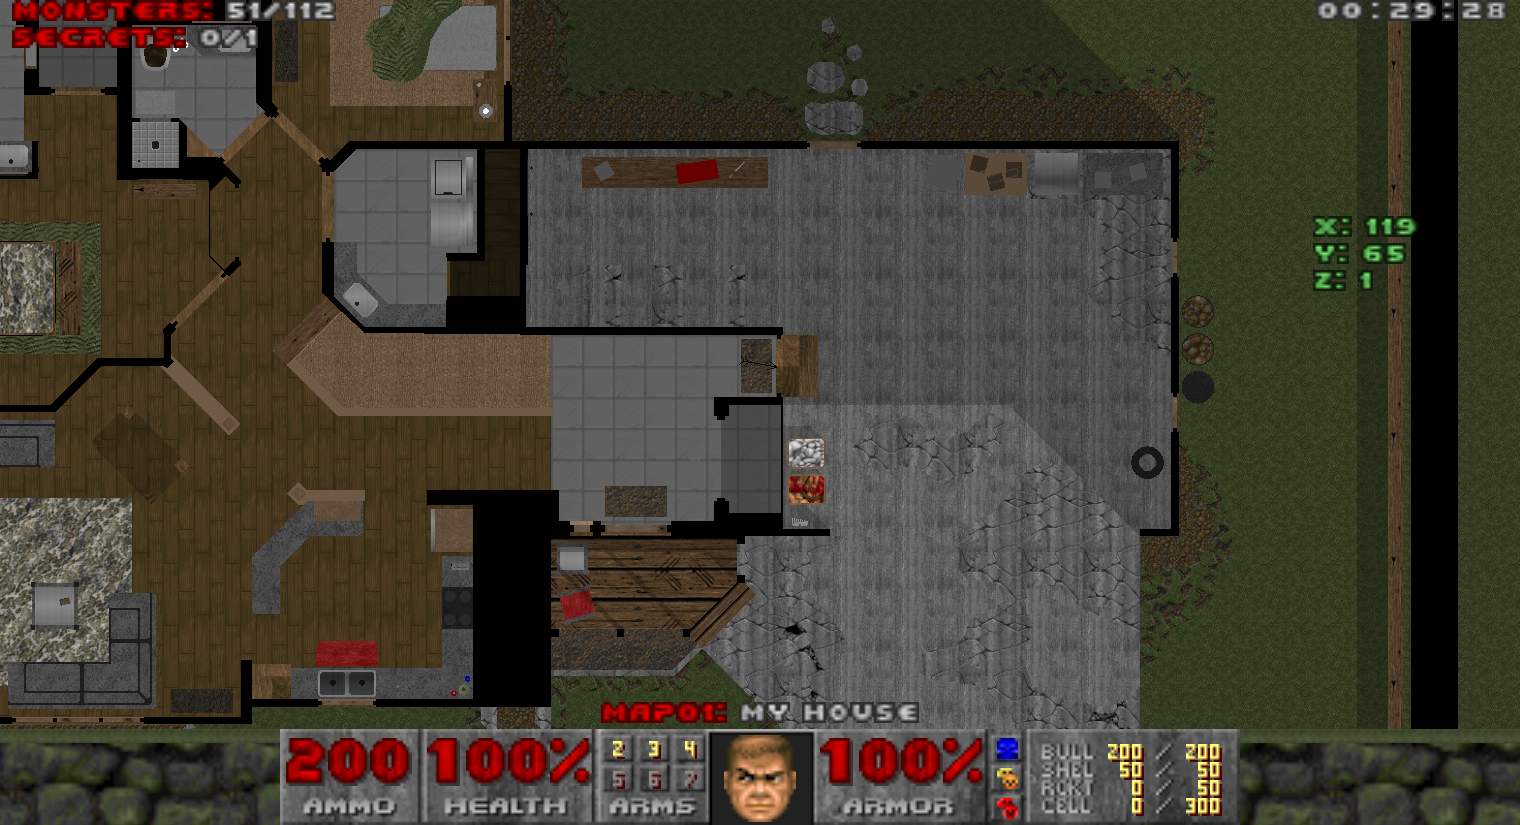 MyHouse.wad is not another gimmicky Doom map with ingenious level